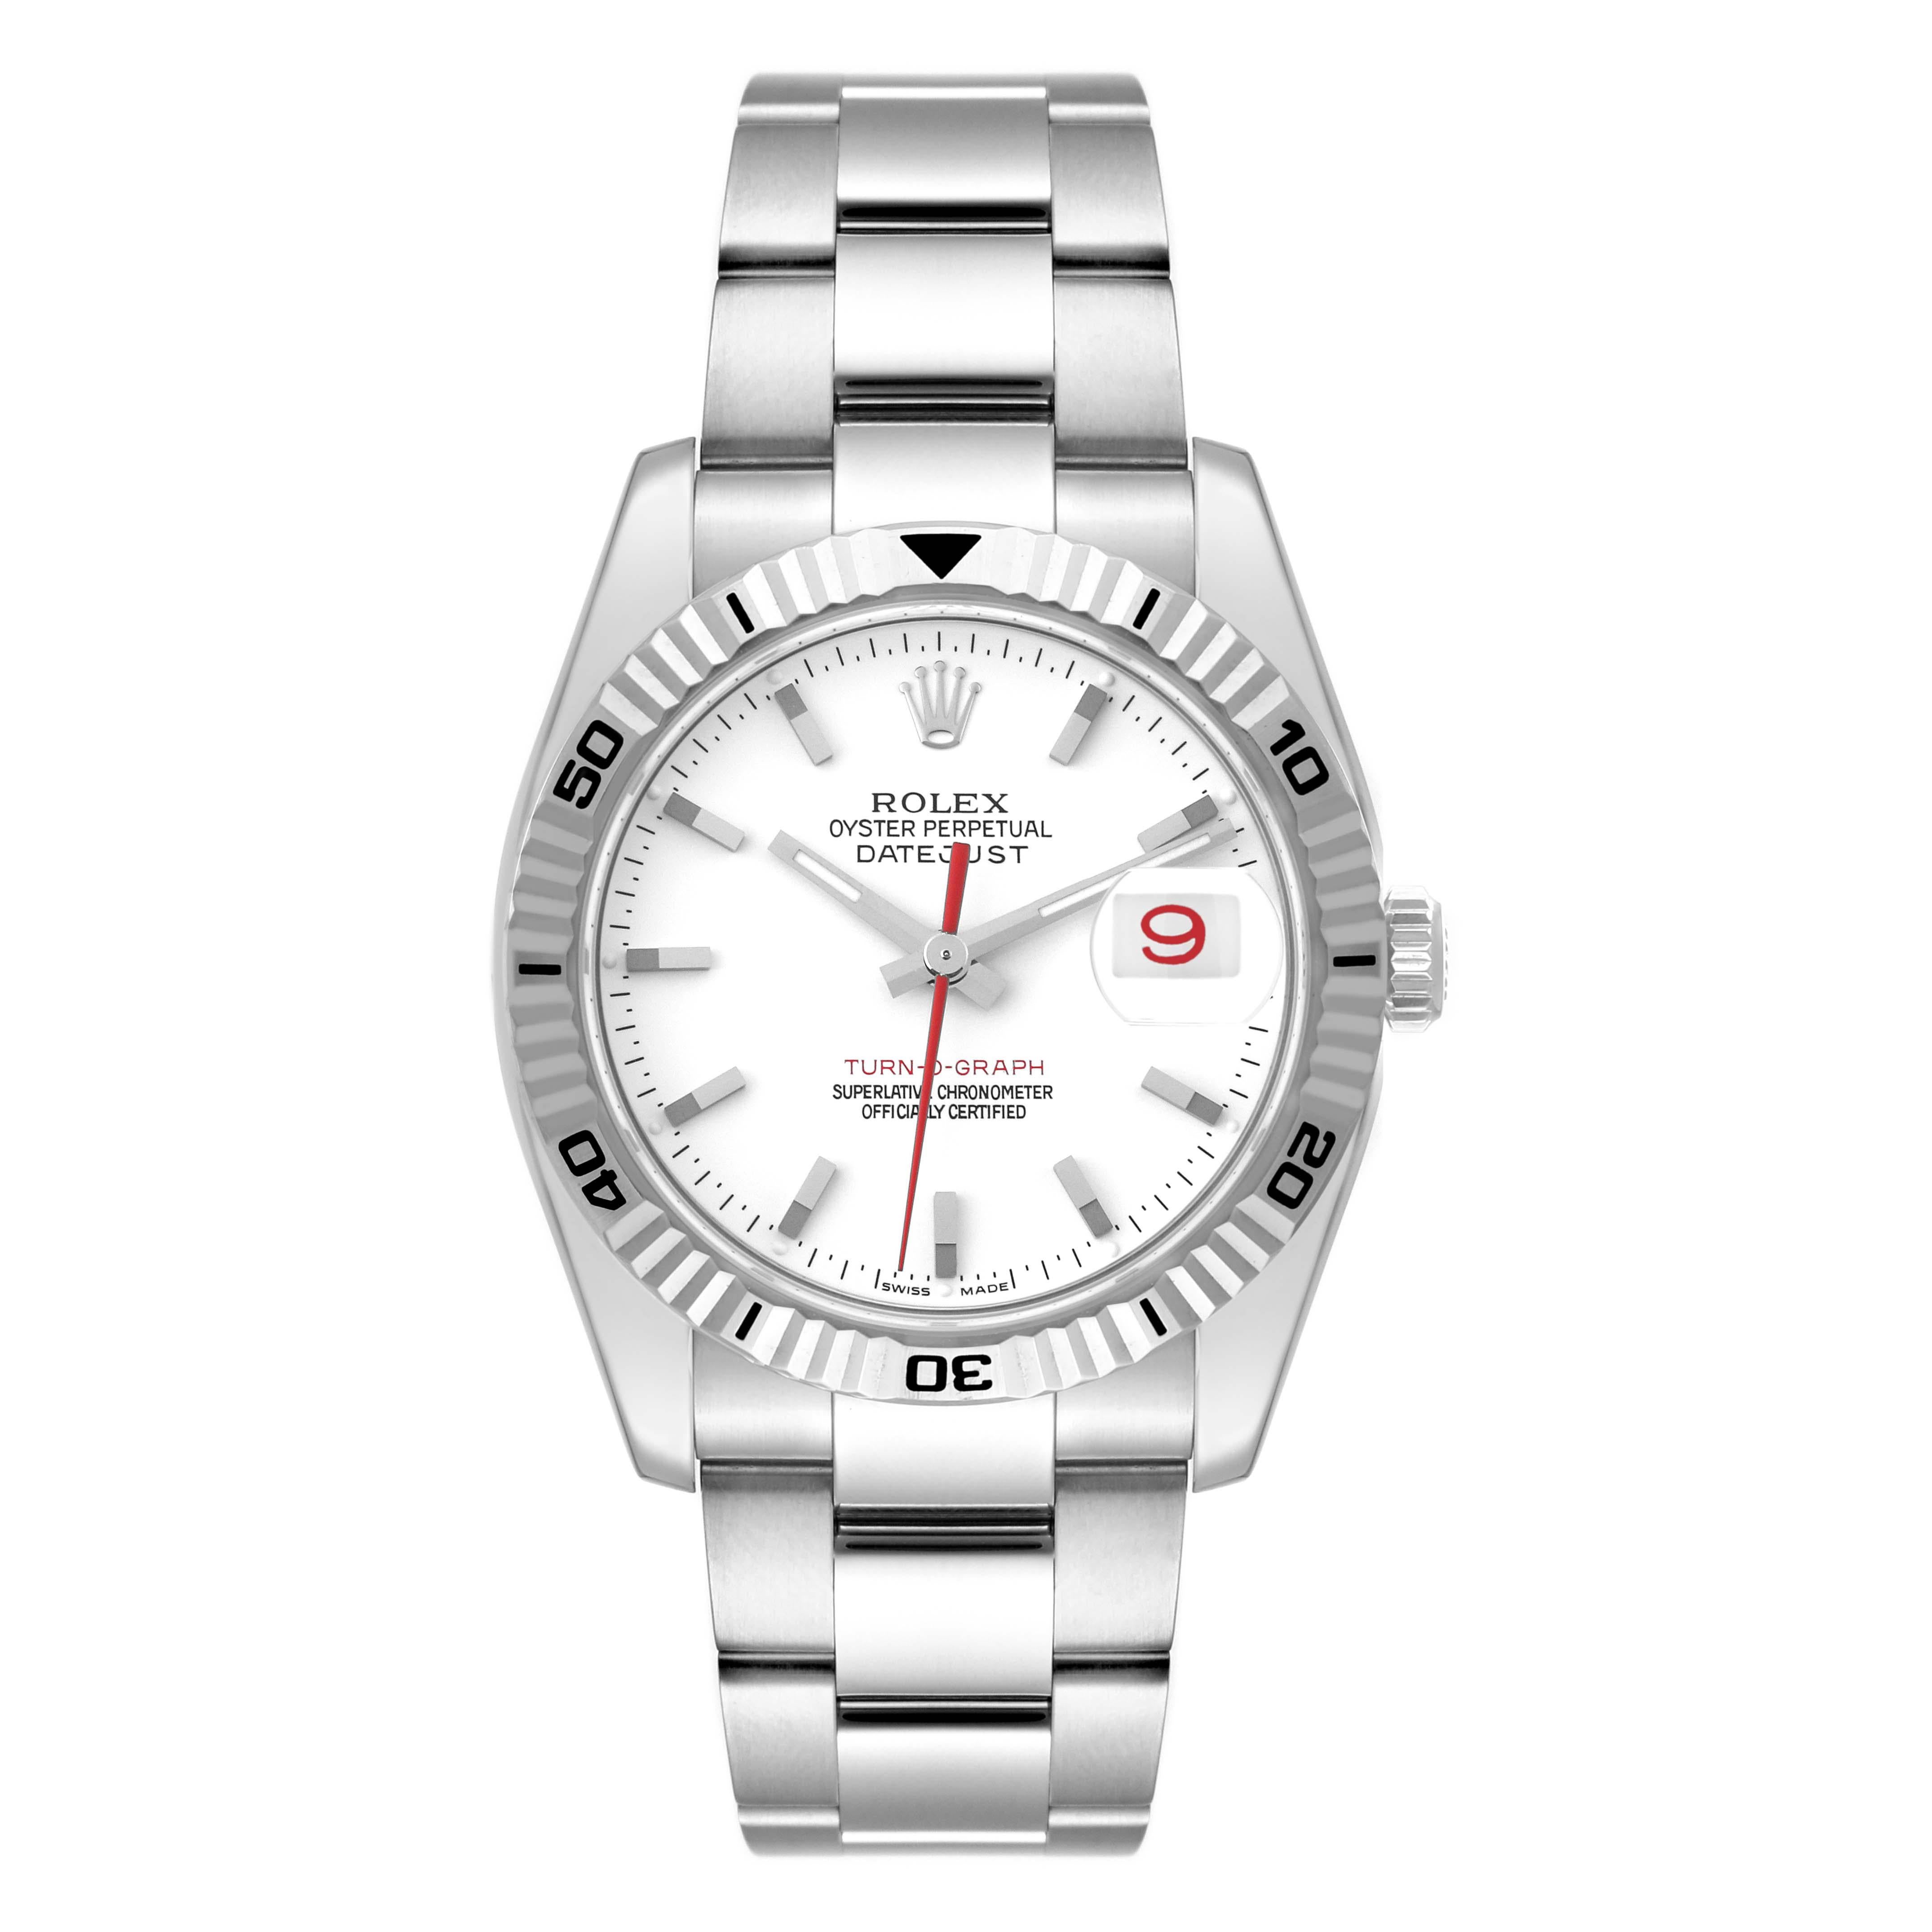 Rolex Datejust Turnograph White Dial Steel Mens Watch 116264 Box Papers. Officially certified chronometer self-winding movement. Stainless steel case 36.0 mm in diameter. Rolex logo on the crown. 18k white gold fluted bidirectional rotating